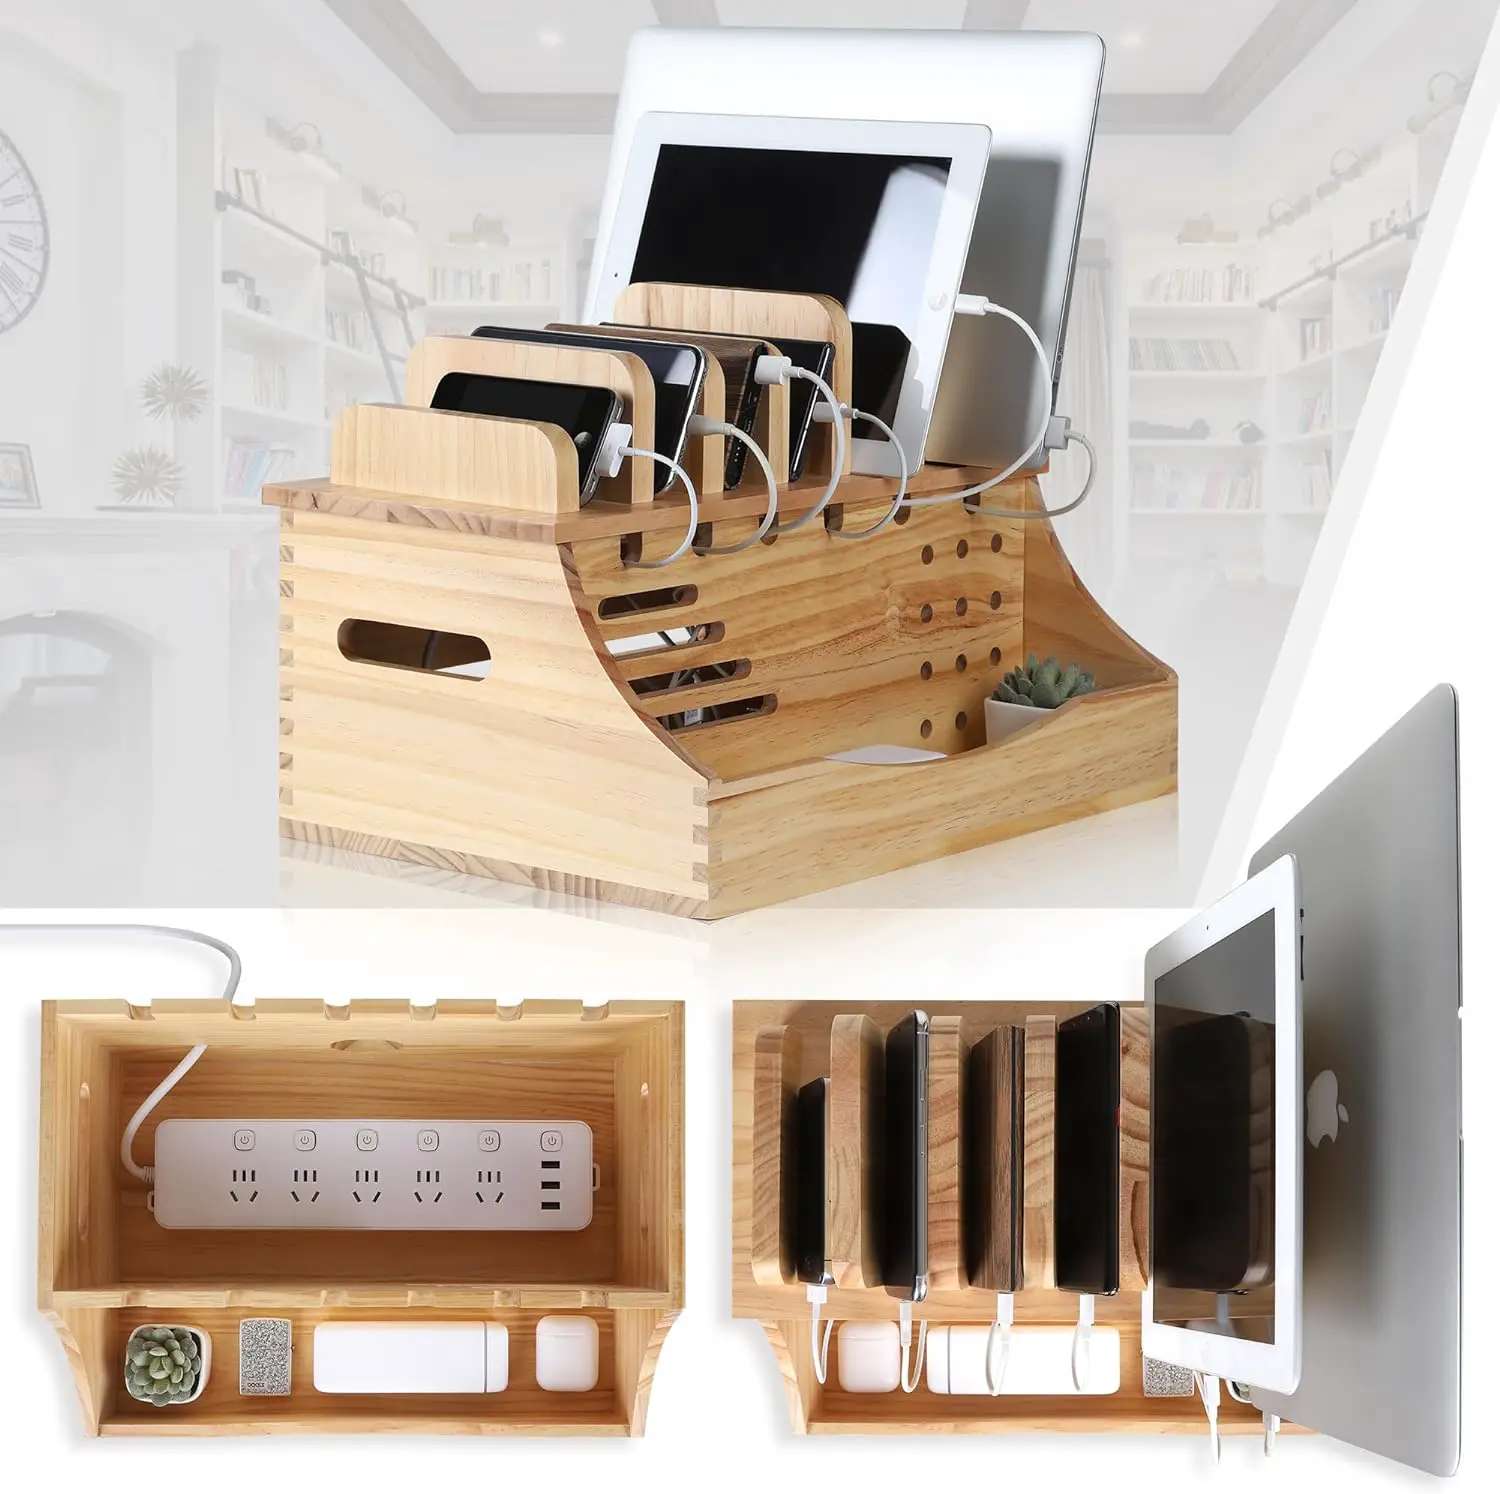 Asaultker 6 Devices Pine Wood Extra Large Cell Phone Charging Stations | Large Charging Station for Multiple Devices - Tablets, Smartphones, iPads, Earphones | Please Note to Check The Product Size